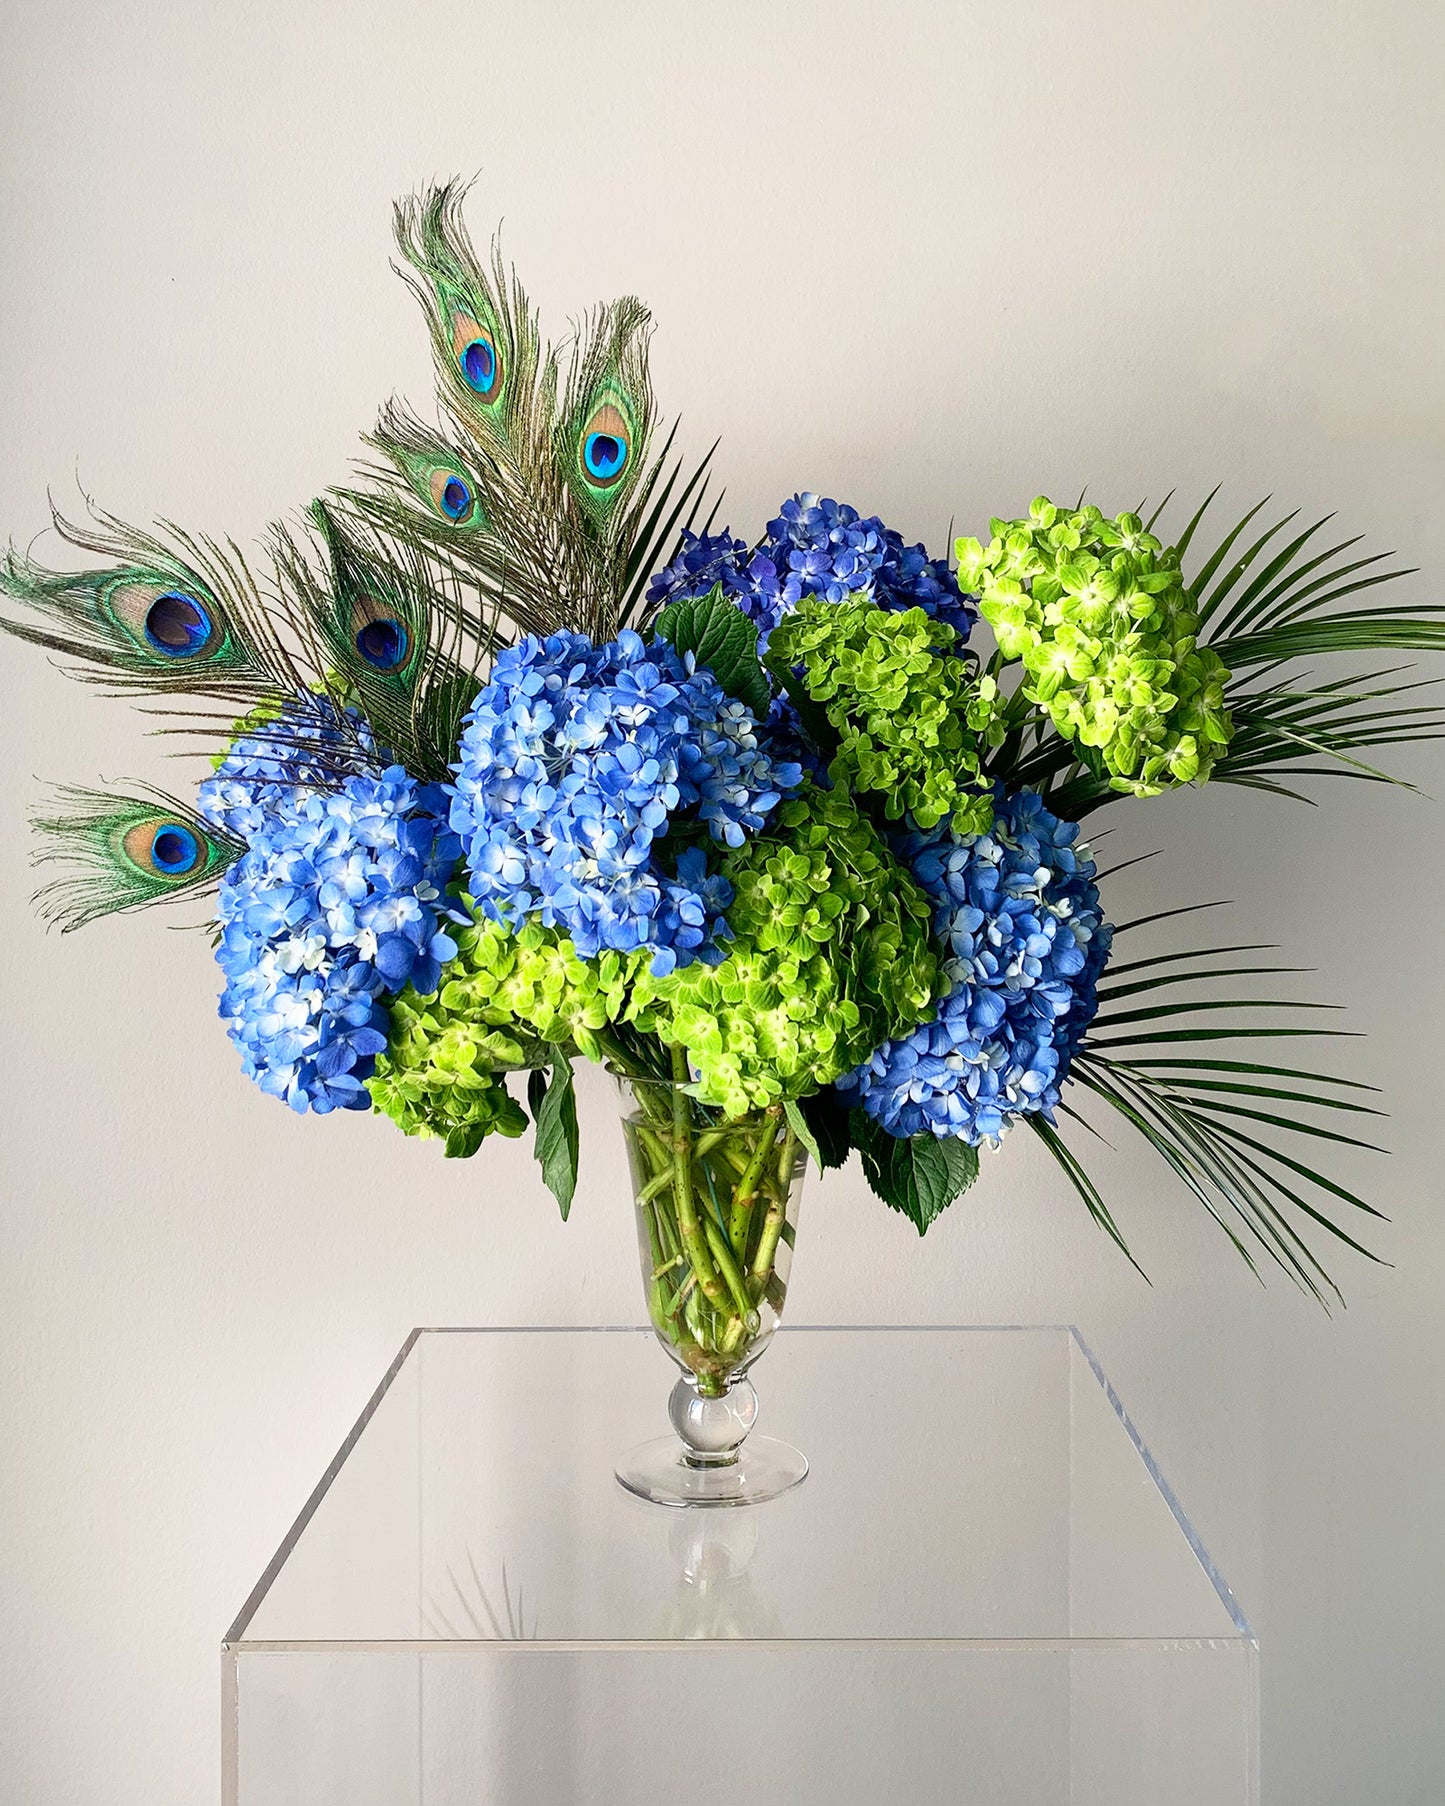 A lowcountry elegance flower arrangement featuring hydrangeas, palm leaves and peacock feathers